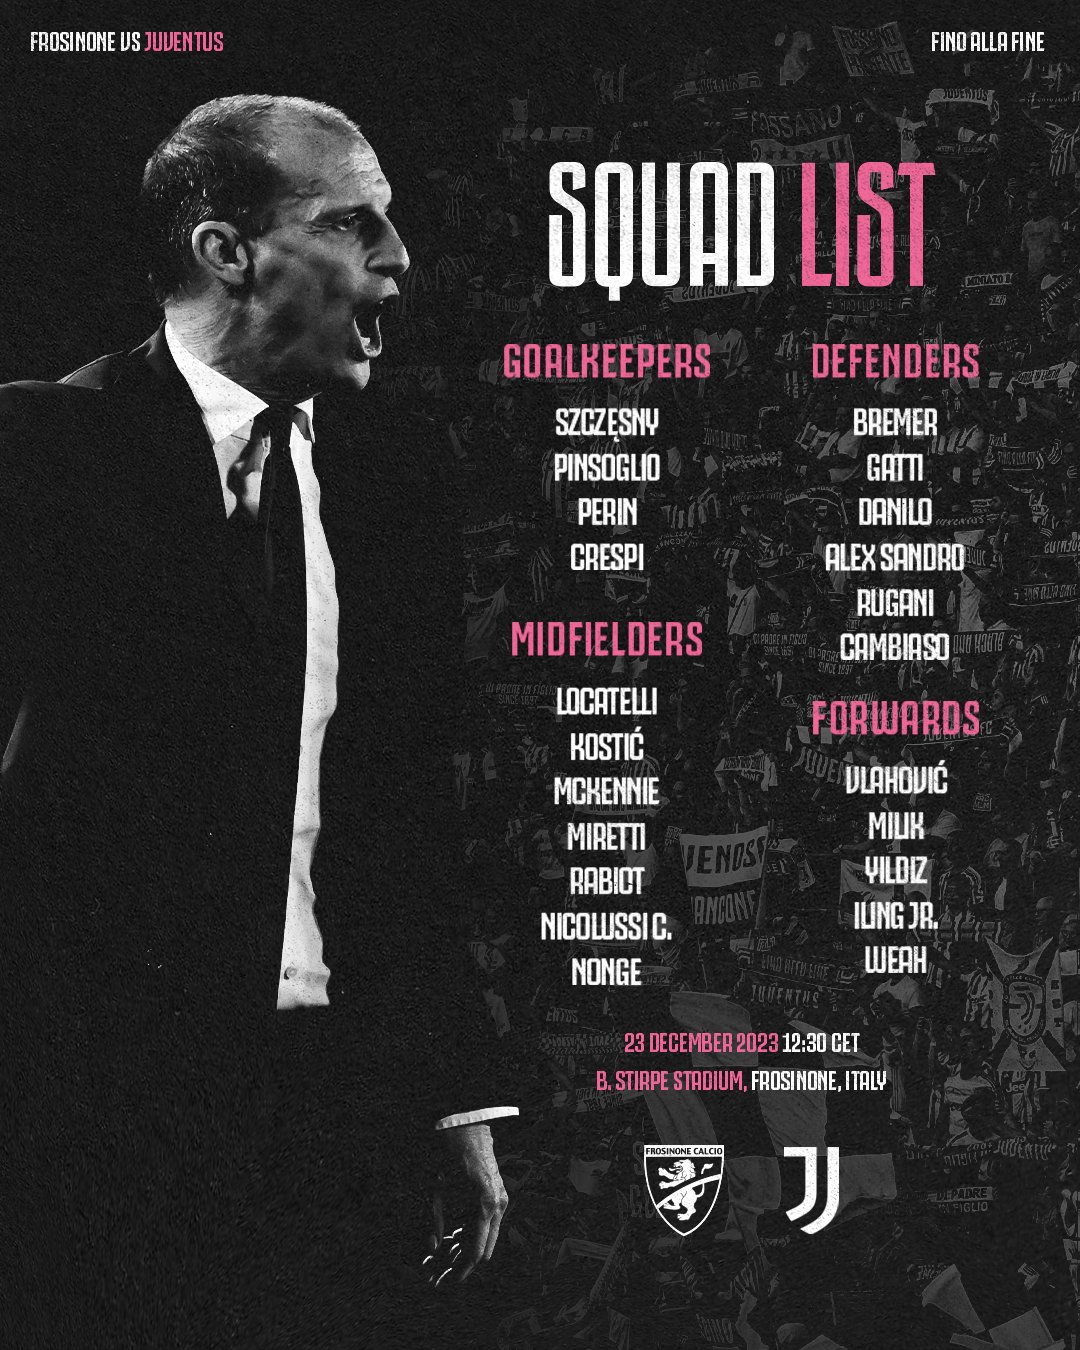 Forza Juventus on X: "❗Official squad list for the game against Frosinone.  Huijsen OUT Chiesa OUT Crespi IN Weah moved to forwards list #Juventus  https://t.co/ryMBOL4mDa" / X